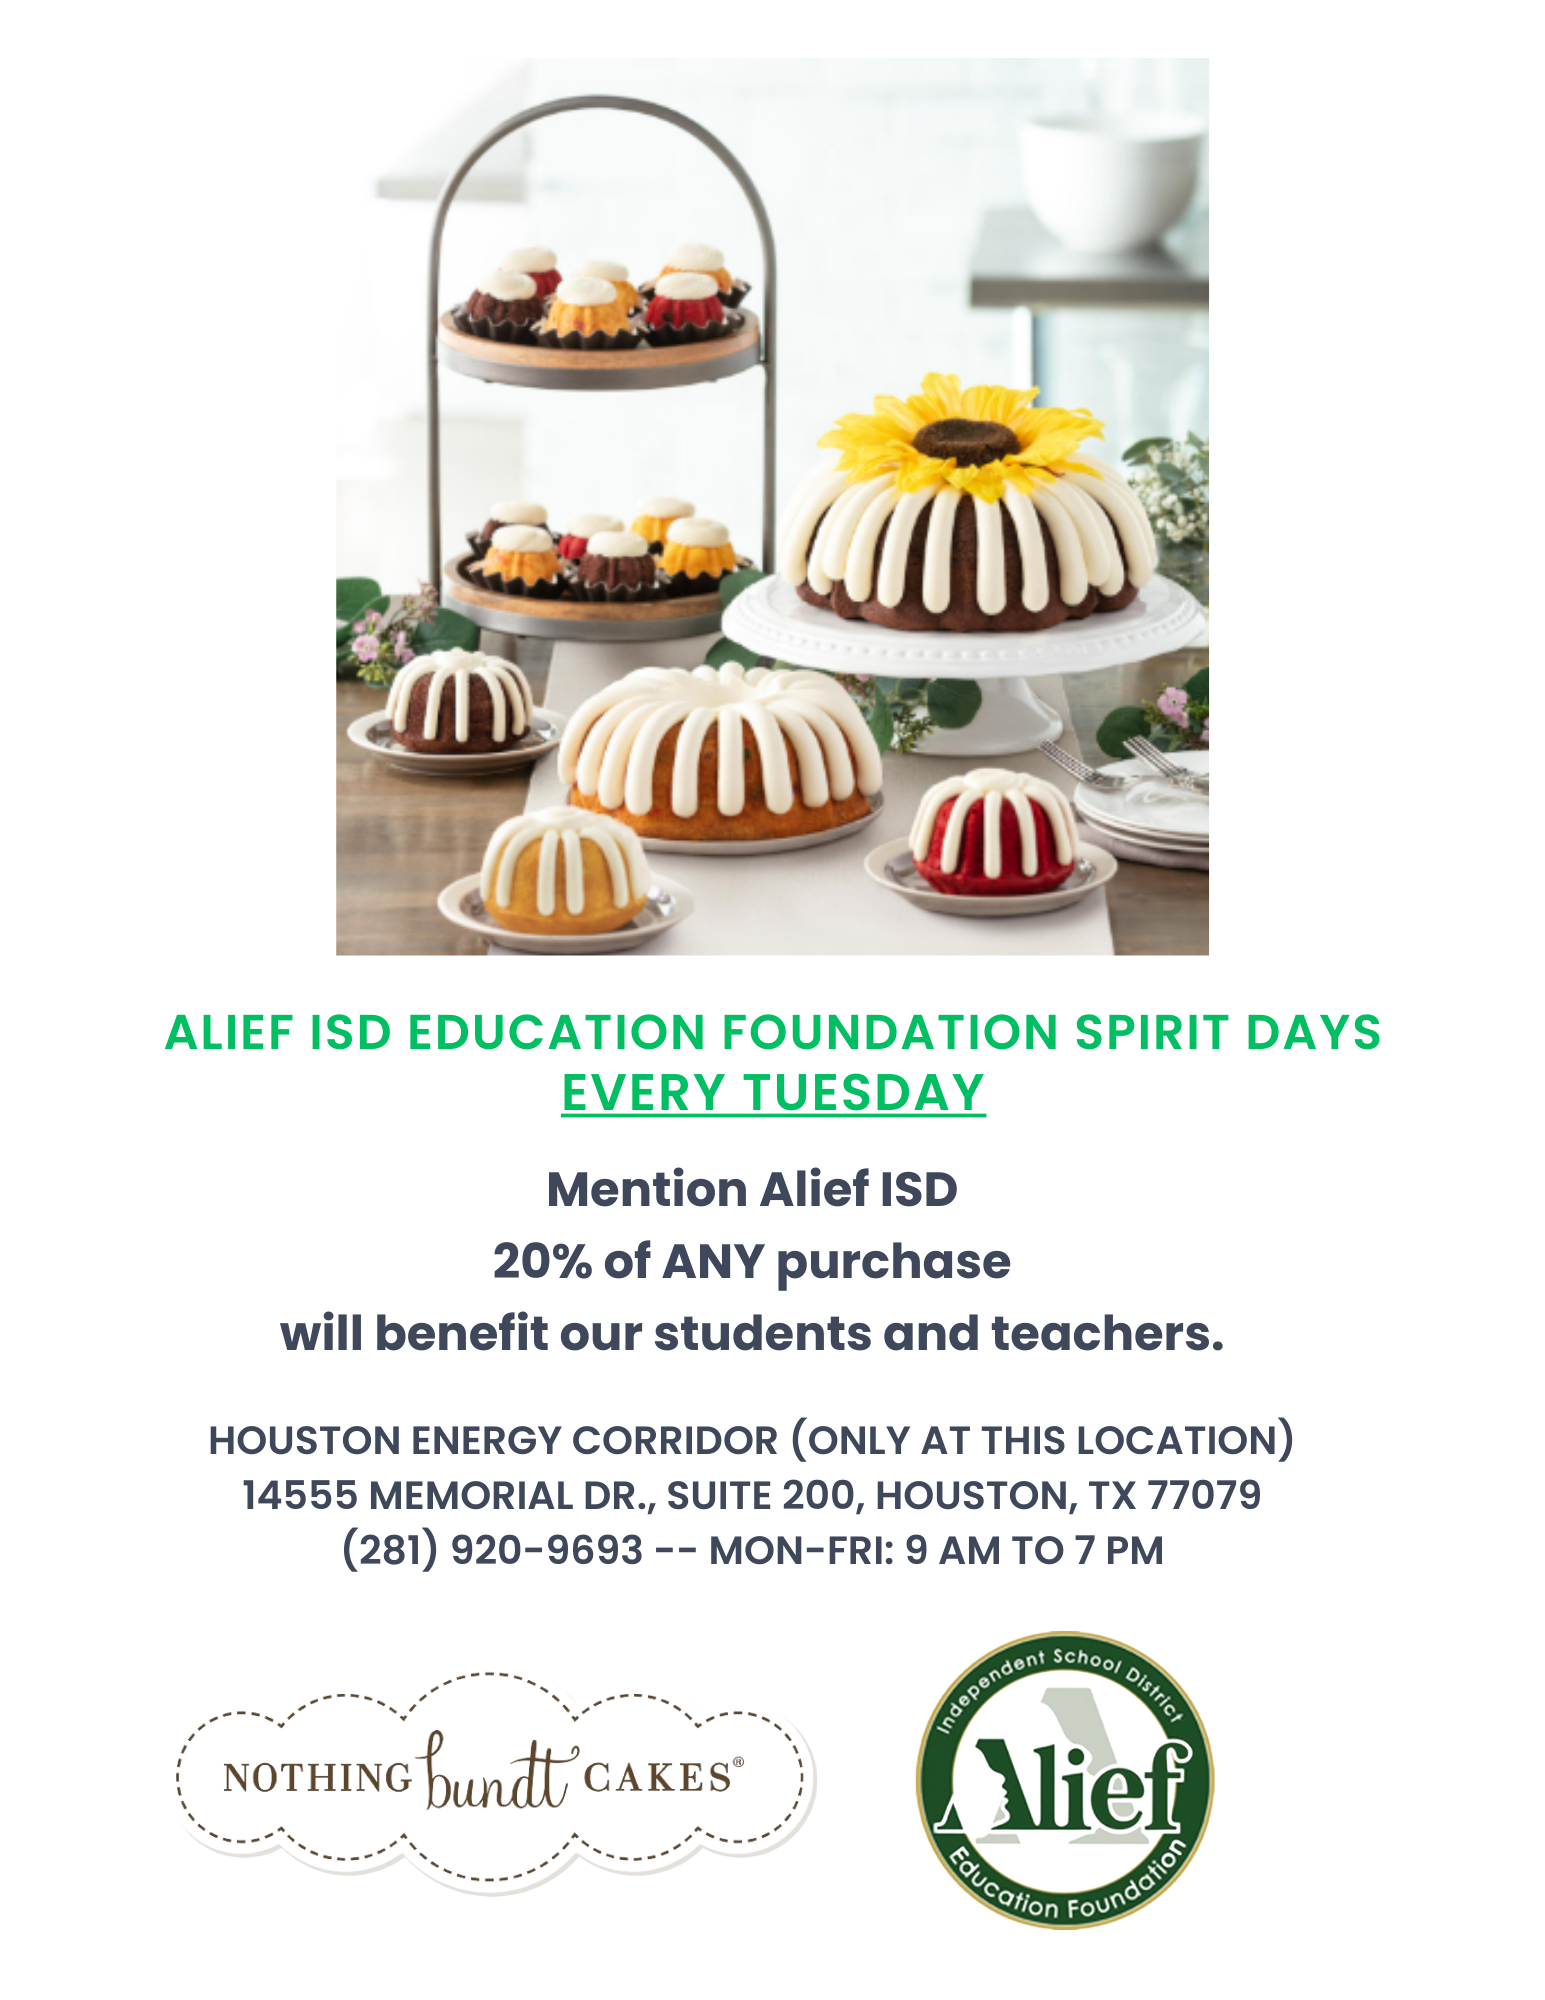 Nothing Bundt Cakes; Alief ISD Foundation Spirit Days EVERY Tuesday; Mention Alief ISD 20% of ANY purchase will benefit our students and teachers. Only available at the Houston Energy Corridor Location: 14555 Memorial Dr., Suite 200, Houston, TX 77079; (281)920-9693 - Monday -Friday: 9:00am to 7:00pm